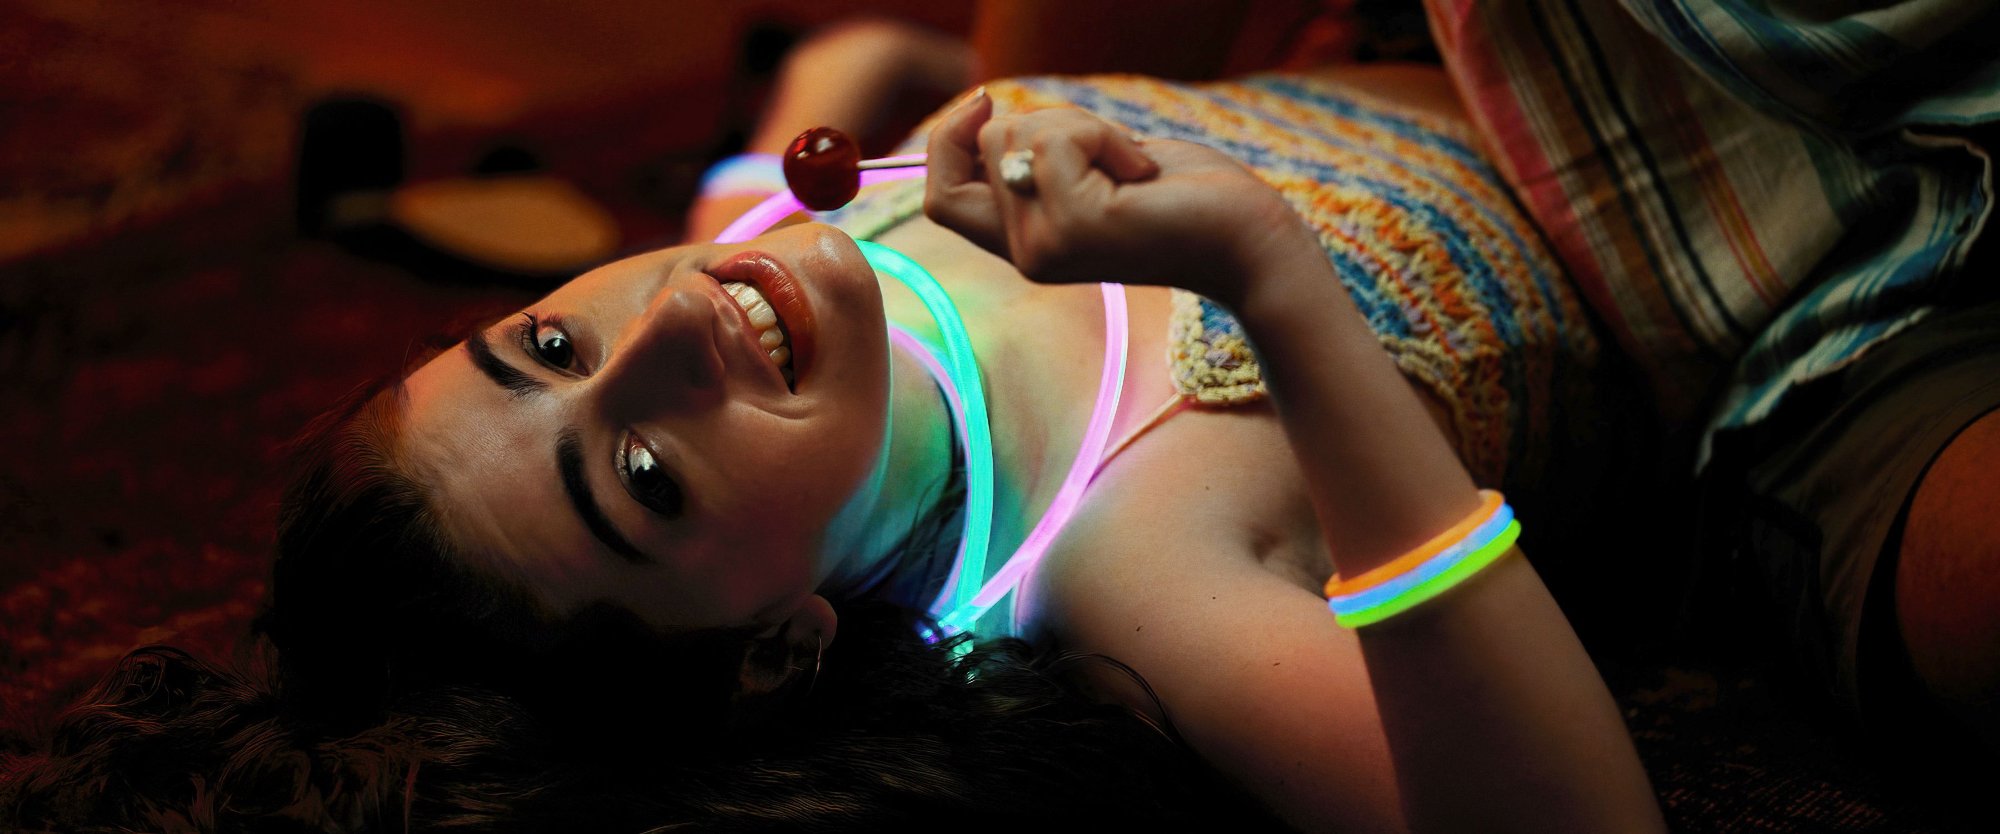 'Bodies Bodies Bodies' Rachel Sennott as Alice laying on her back with neon lights around her neck, smiling, holding a lollipop